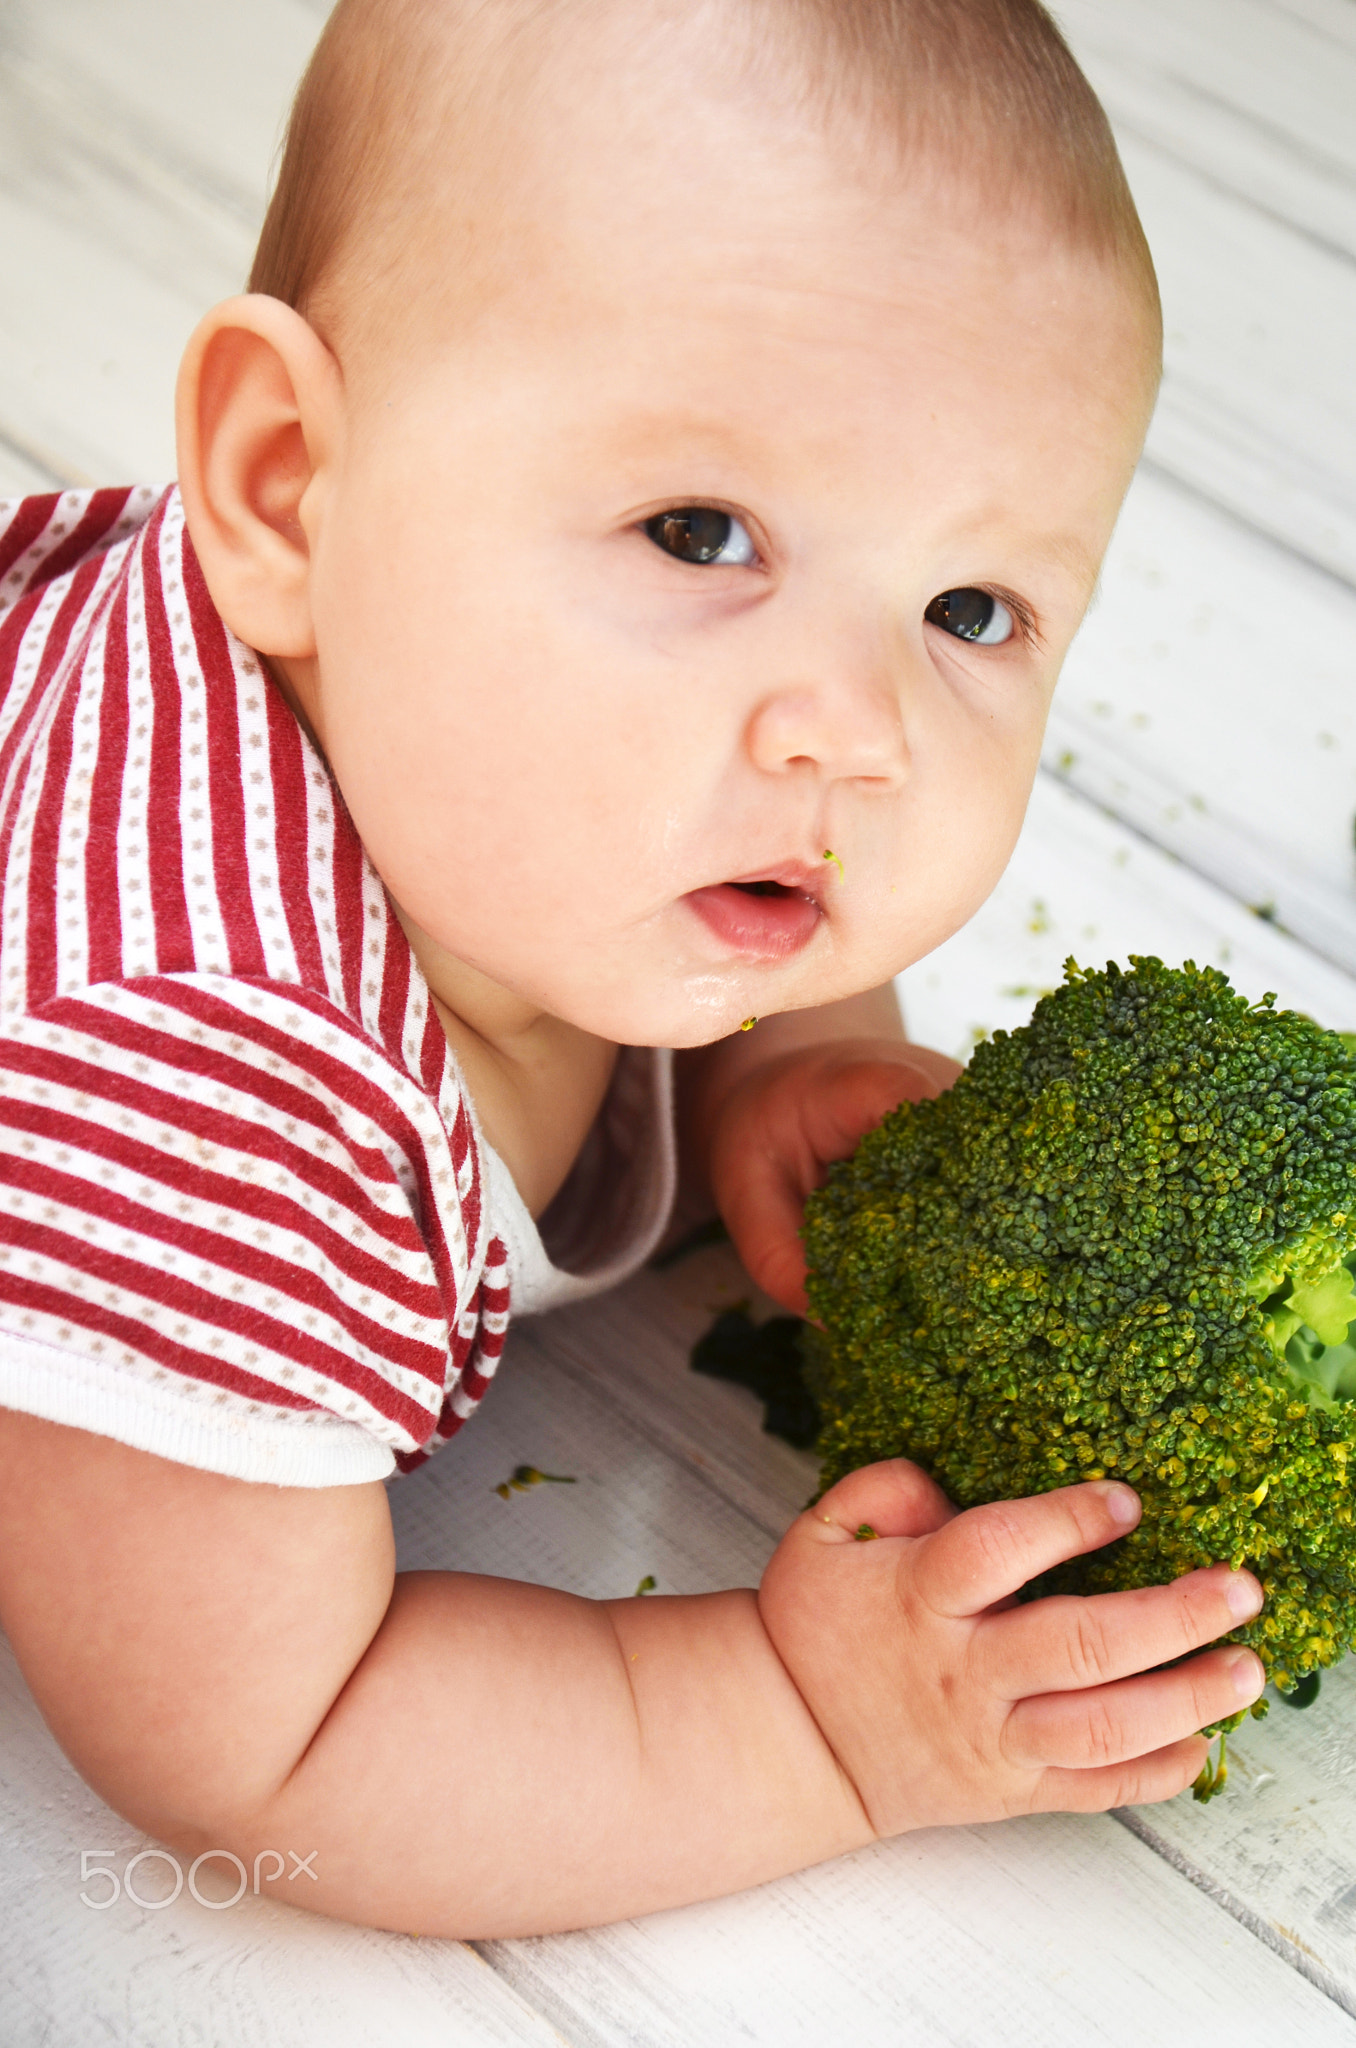 Child little girl eats vegetable. Little baby with broccoli. Baby with vegetables